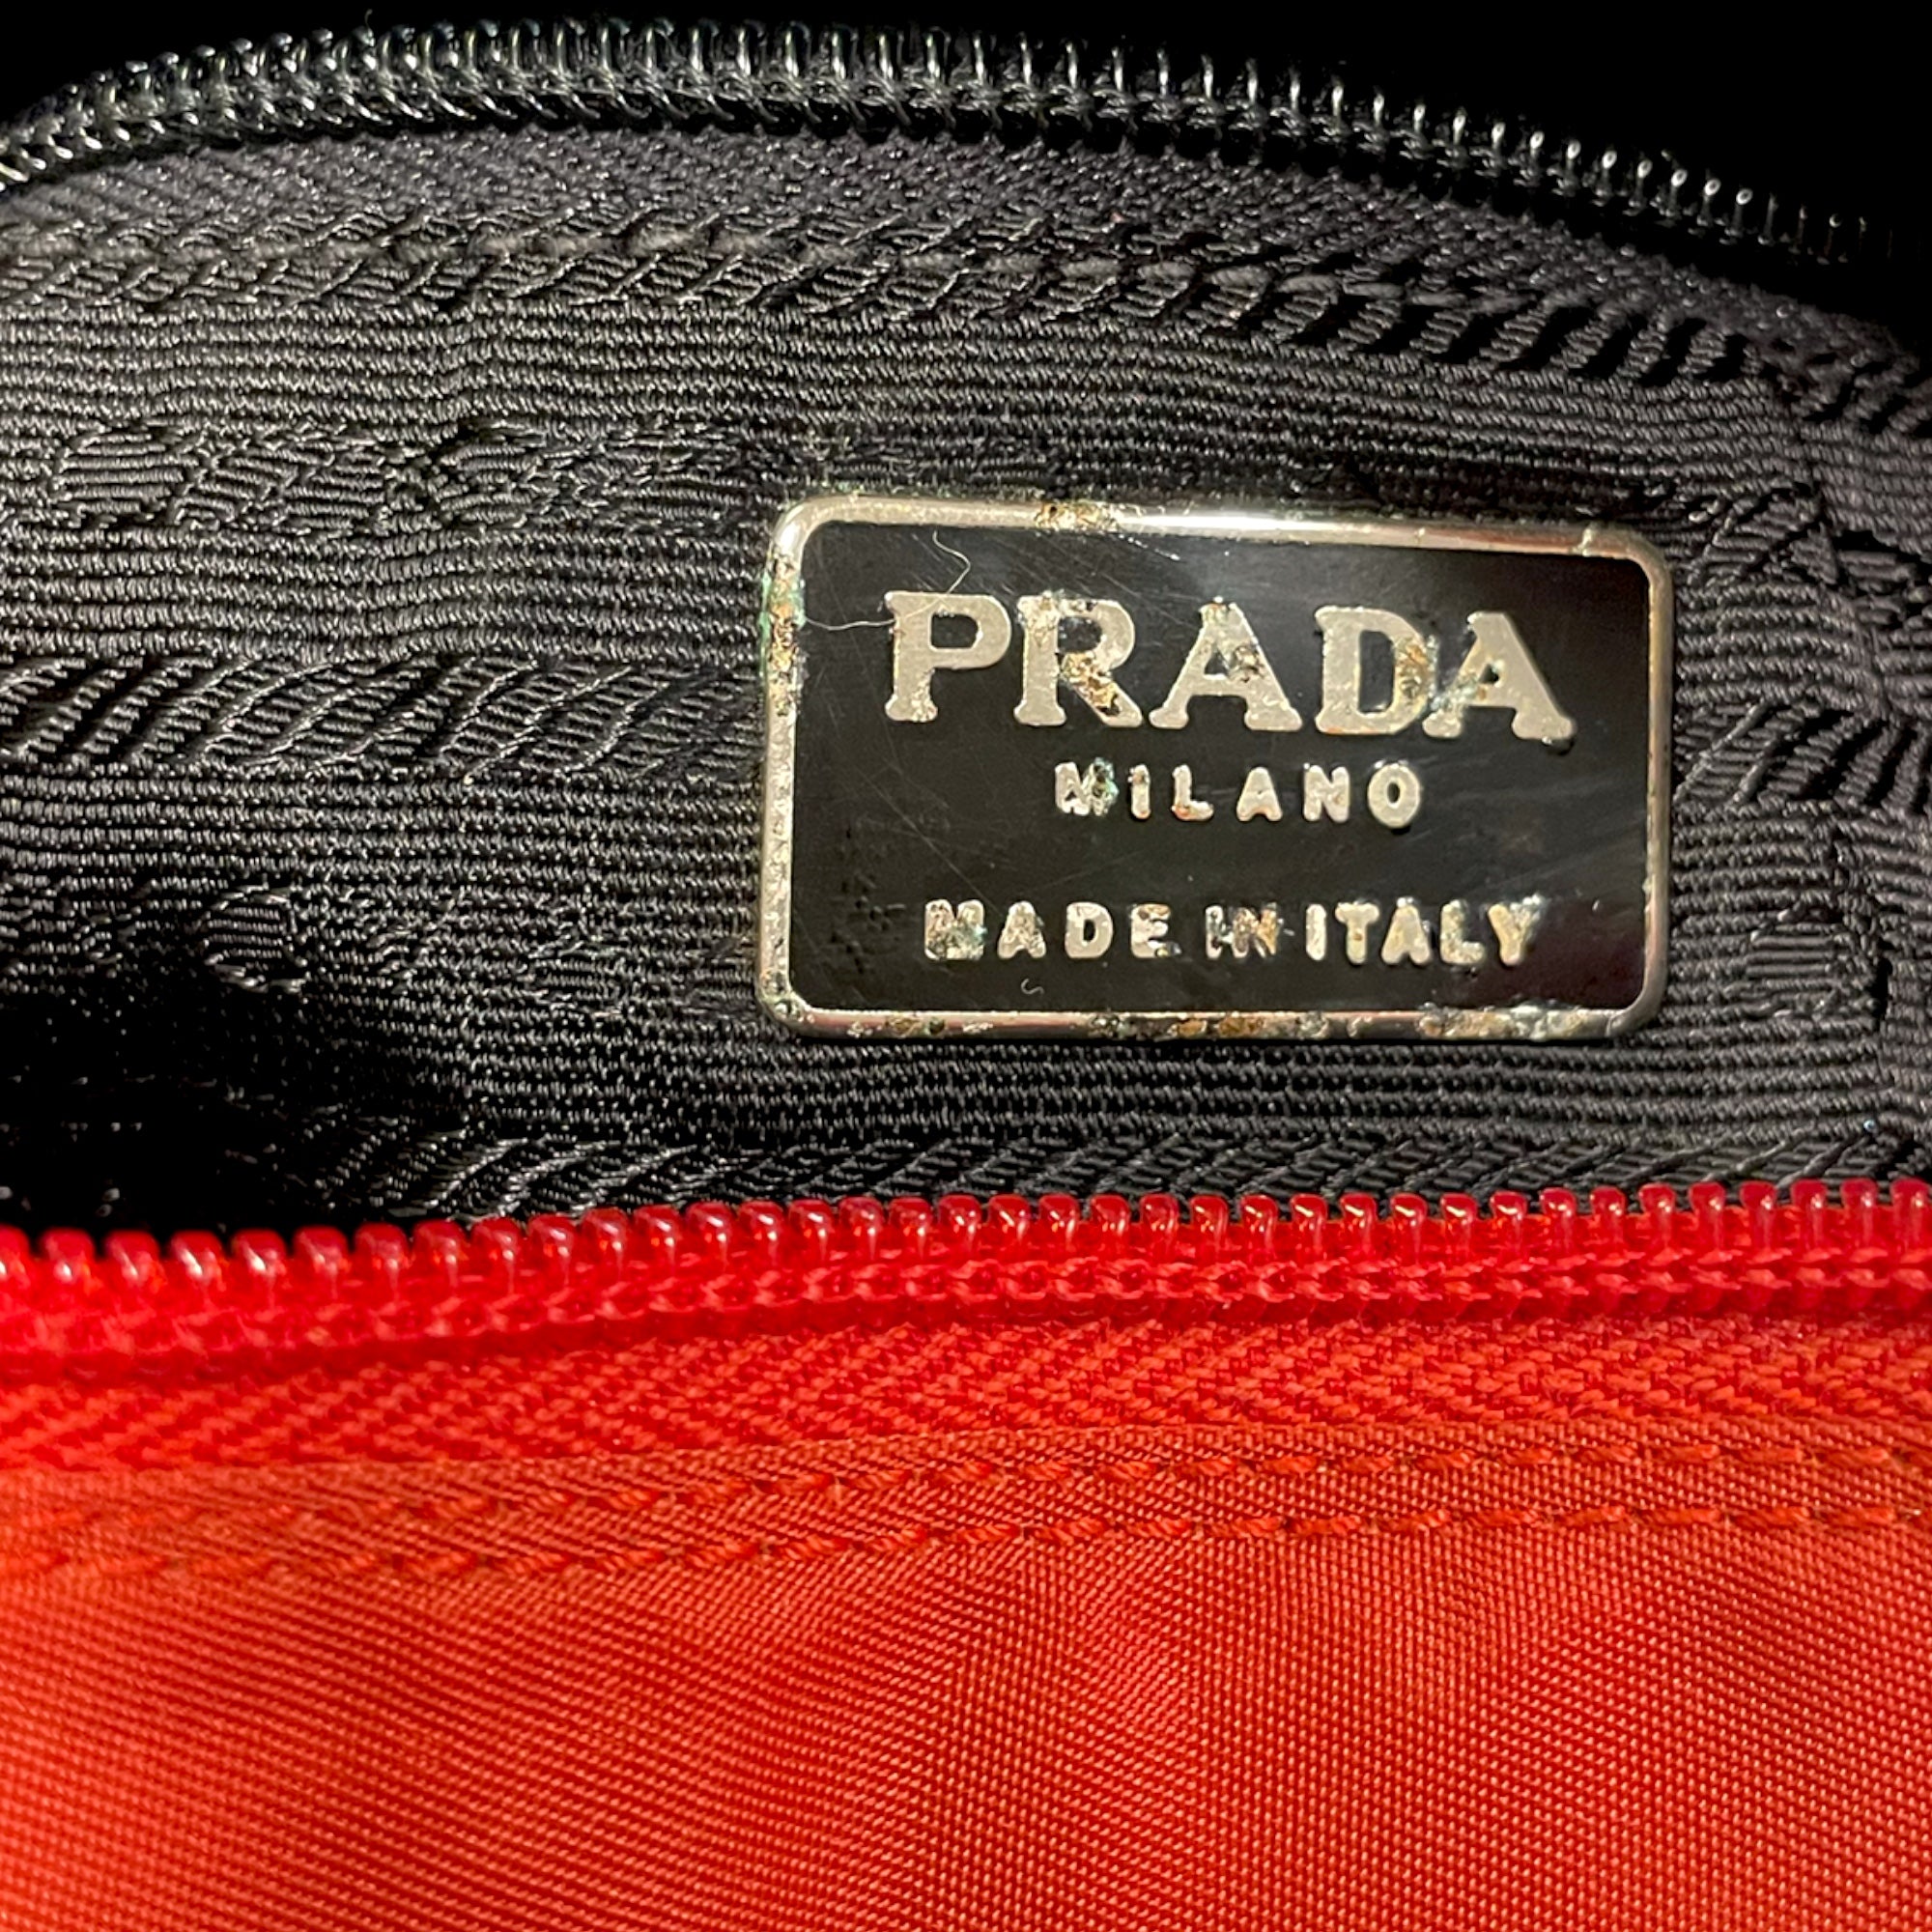 PRADA Tote with Python Handles and Beaded Front Logo